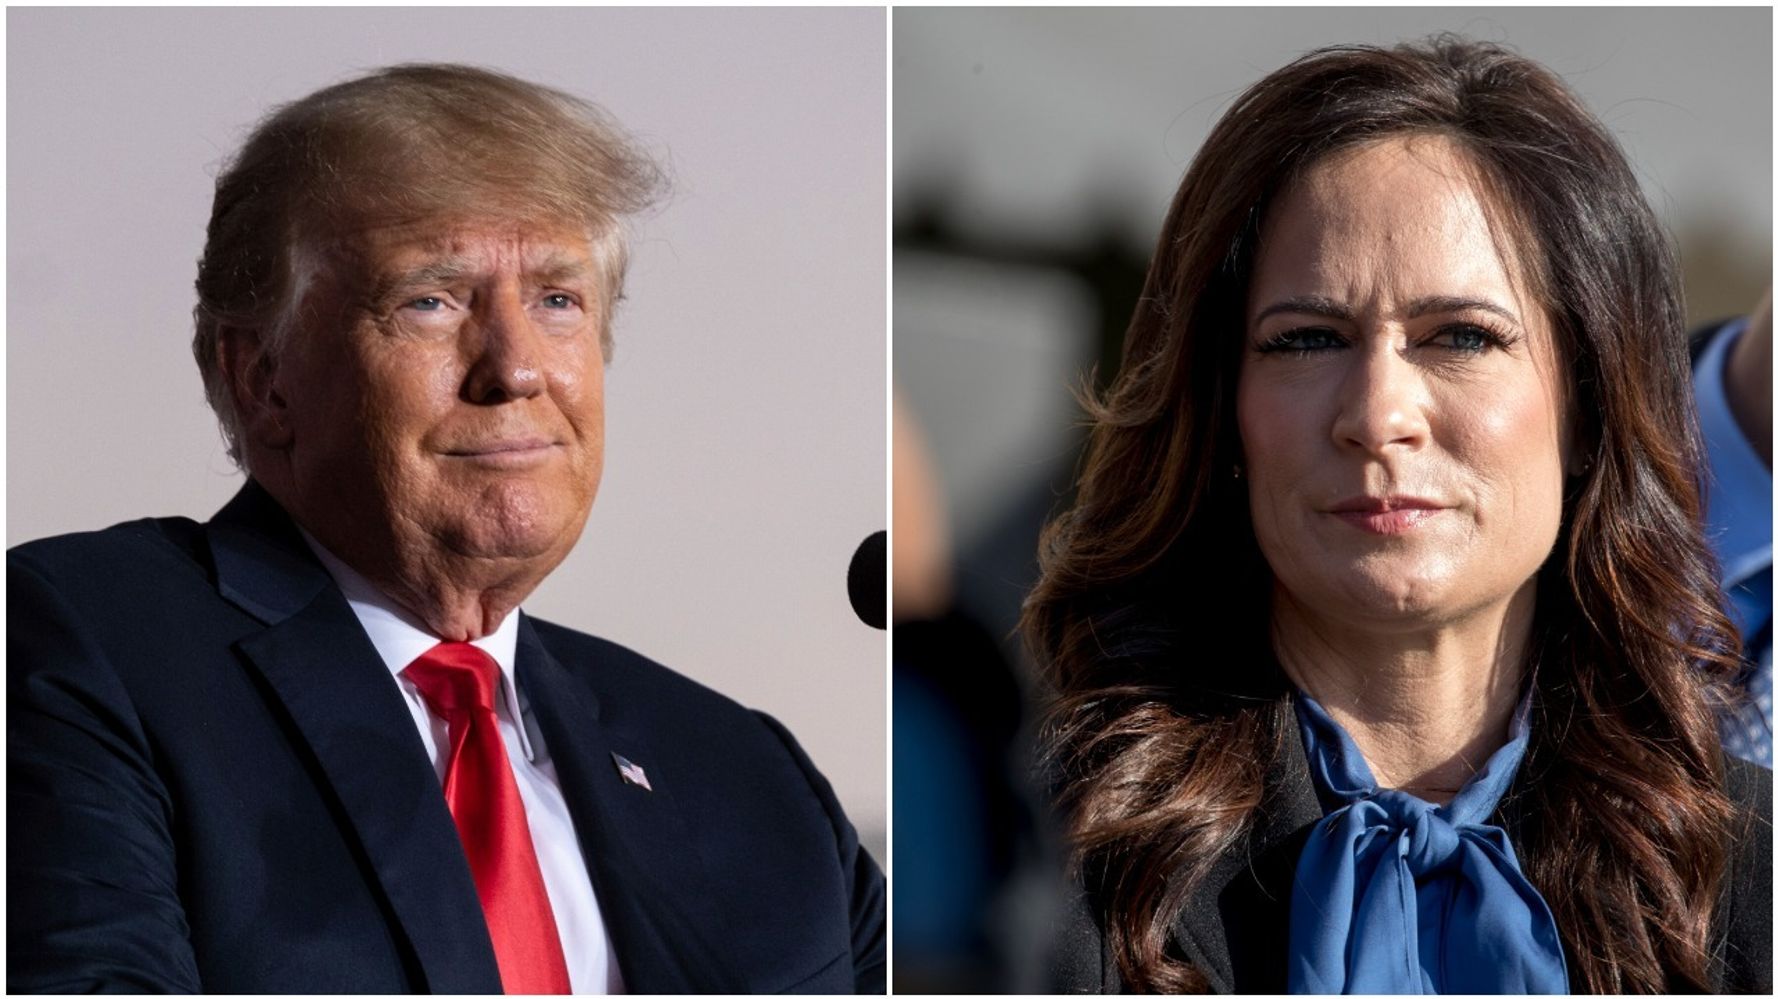 Stephanie Grisham Reveals Trump Called To Tell Her About His Penis